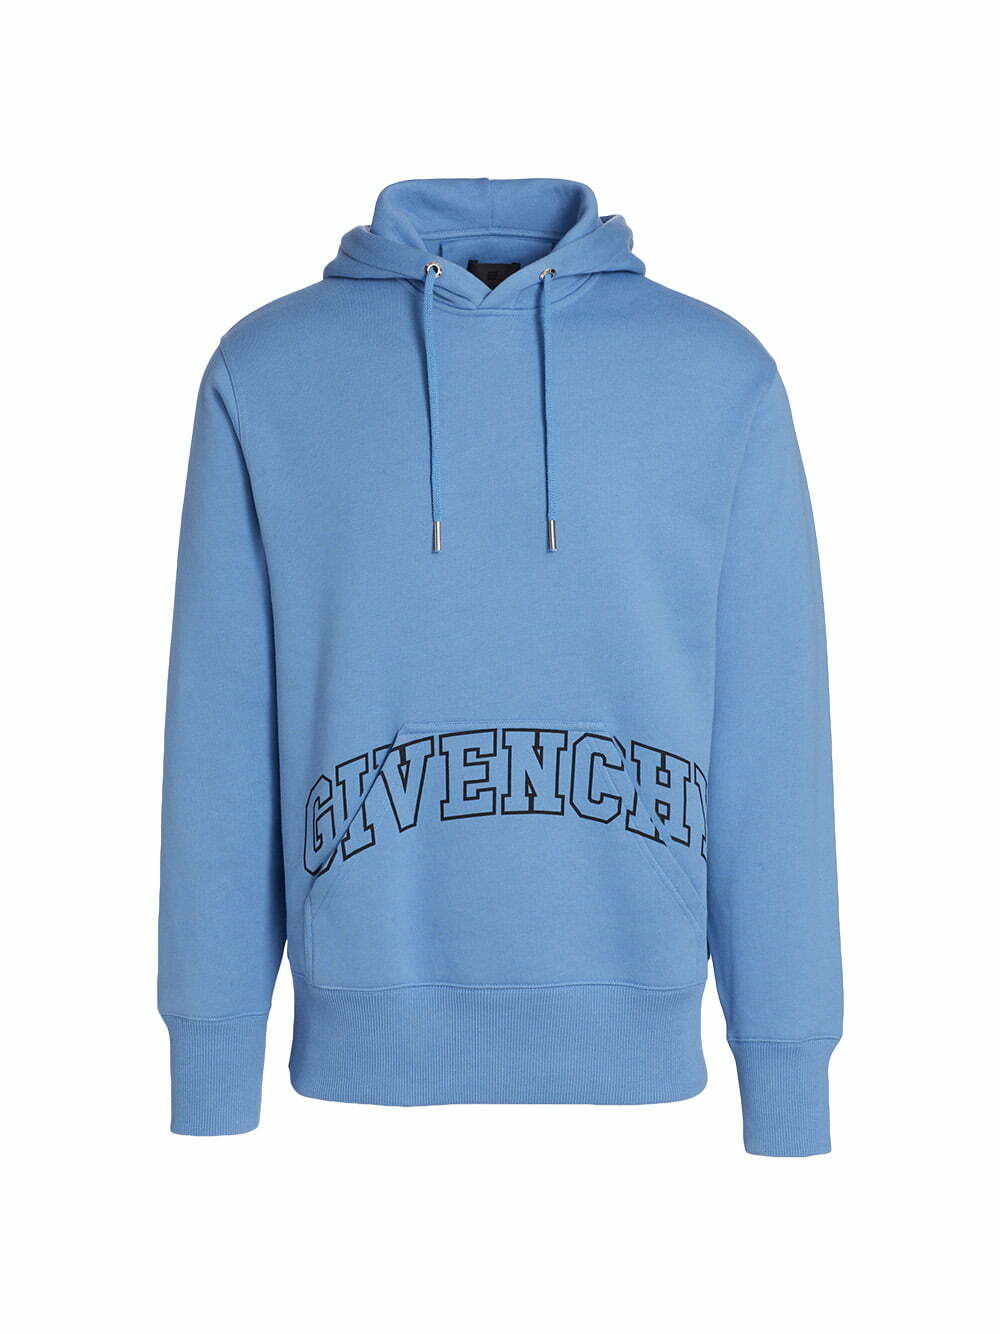 Givenchy Hoodie (Men's)